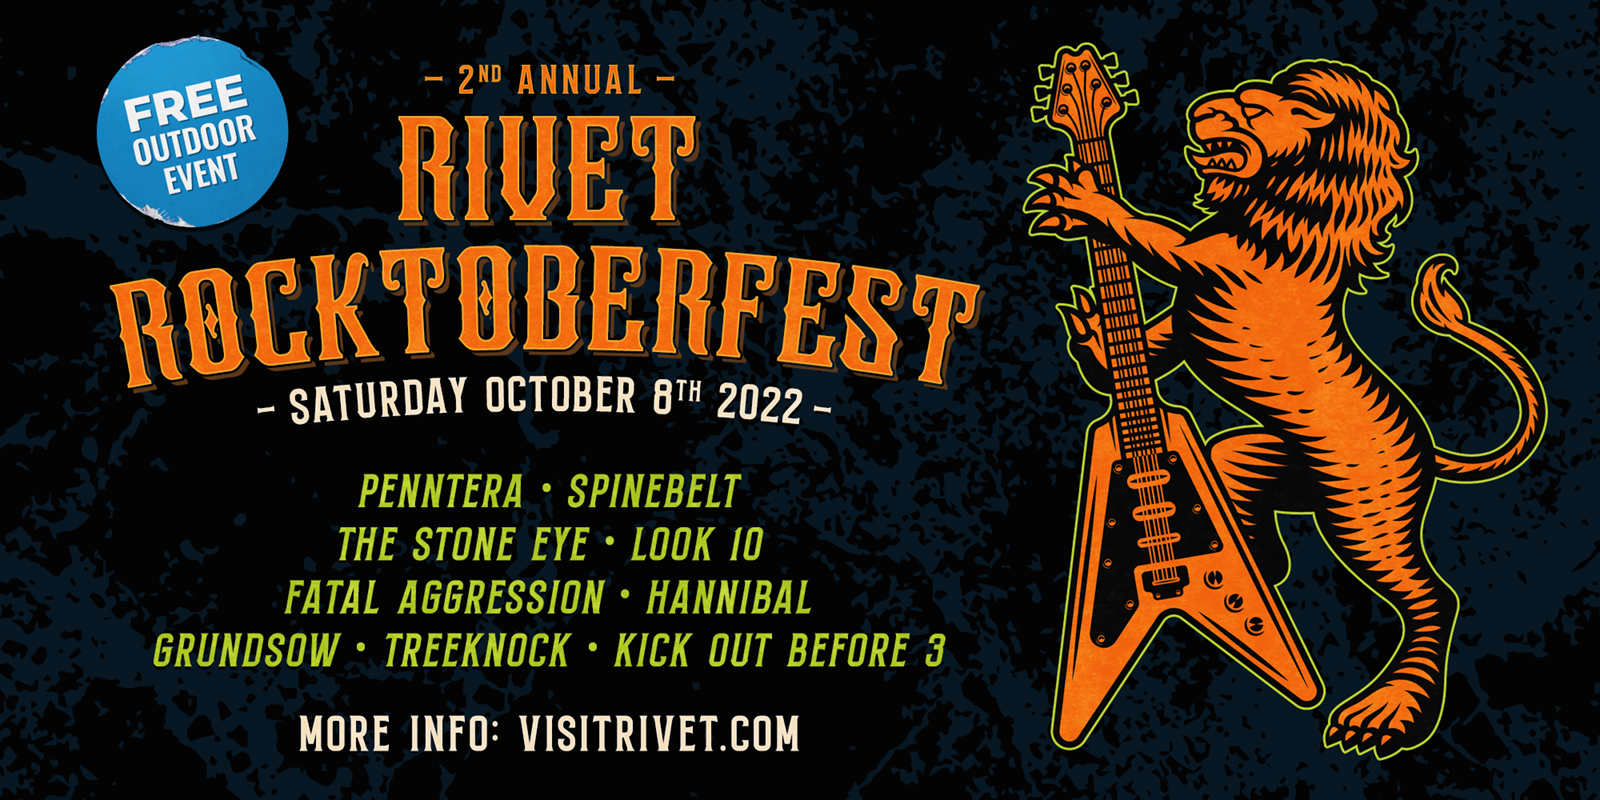 2nd Annual Rivet Rocktoberfest 2022 on Saturday, October 8th with a bunch of fun, loud, beer loving bands on our outdoor stage!